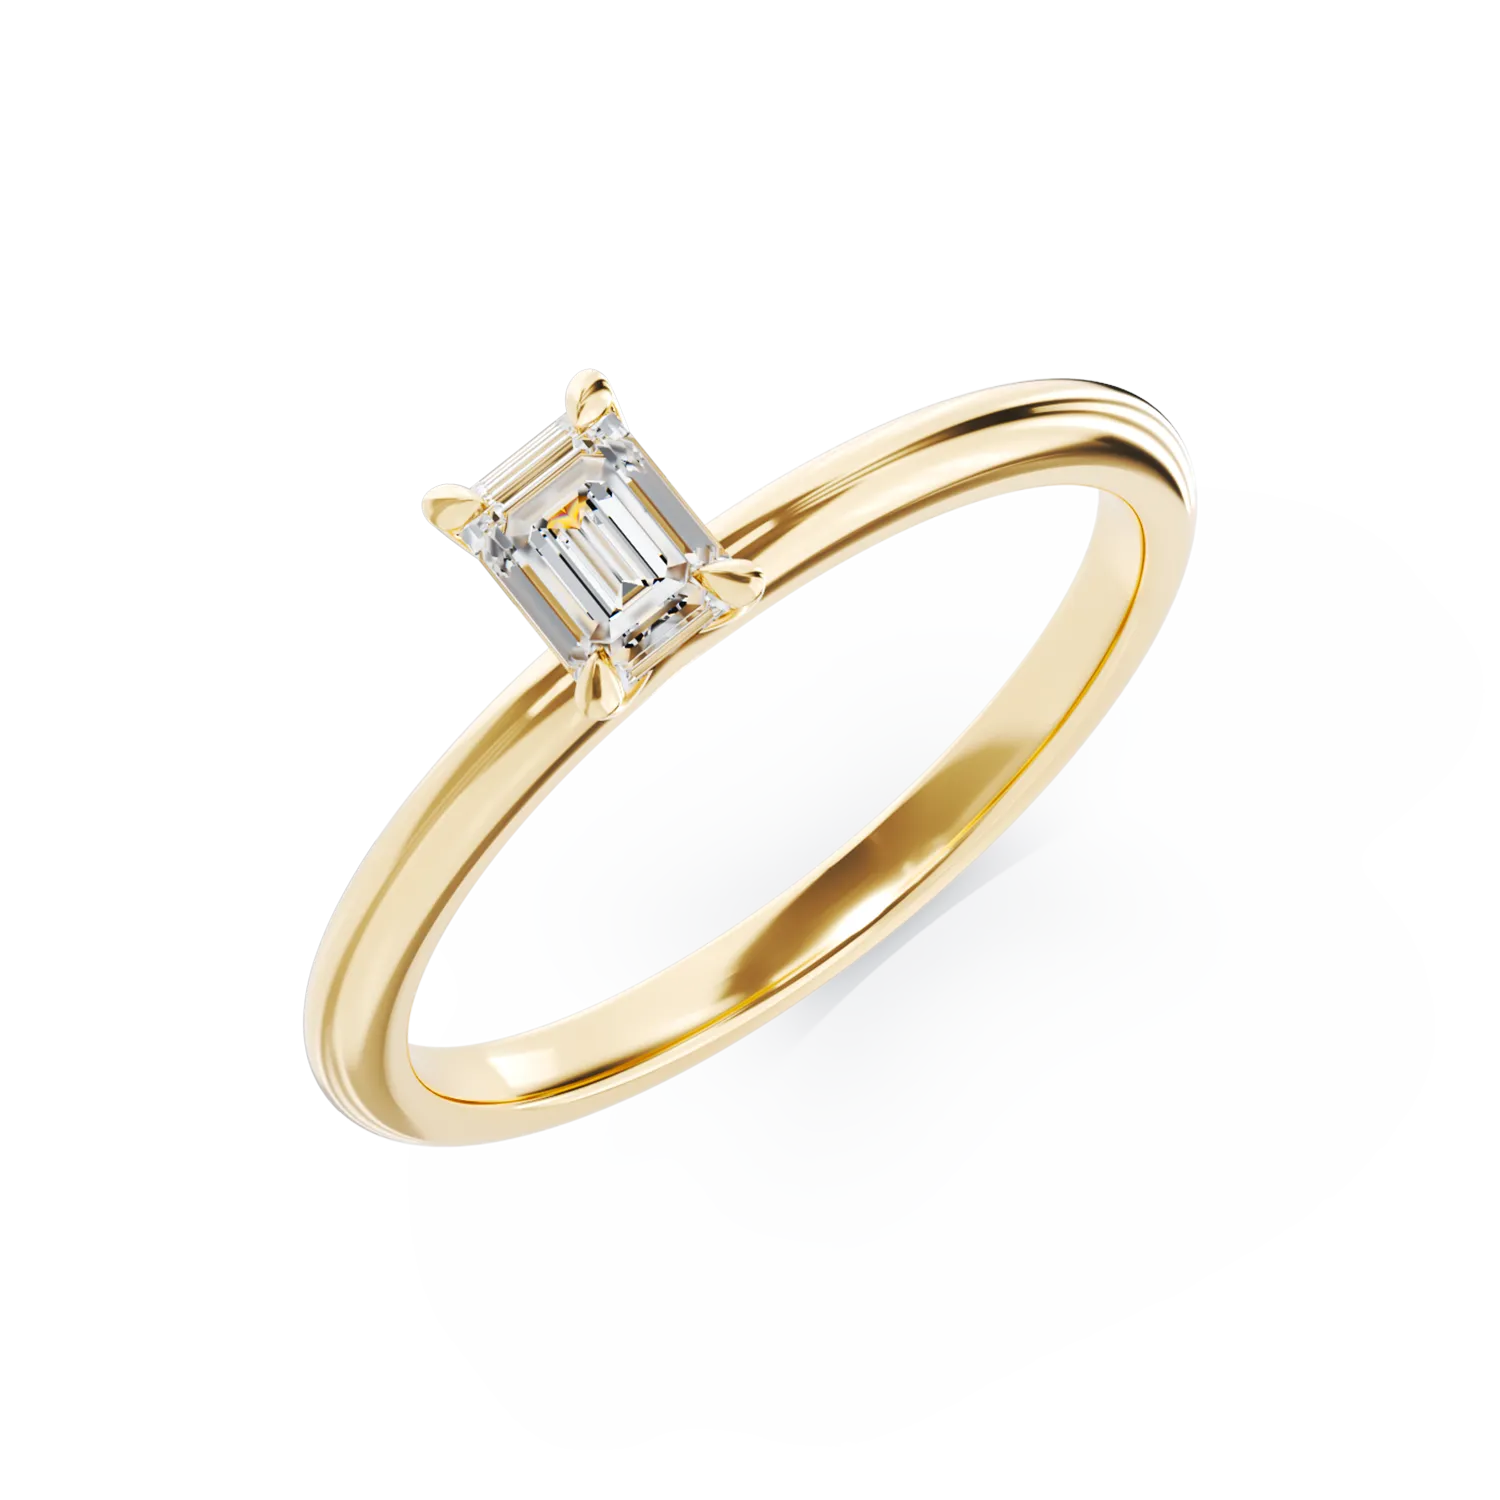 18k yellow gold engagement ring with a 0.4ct solitary diamond